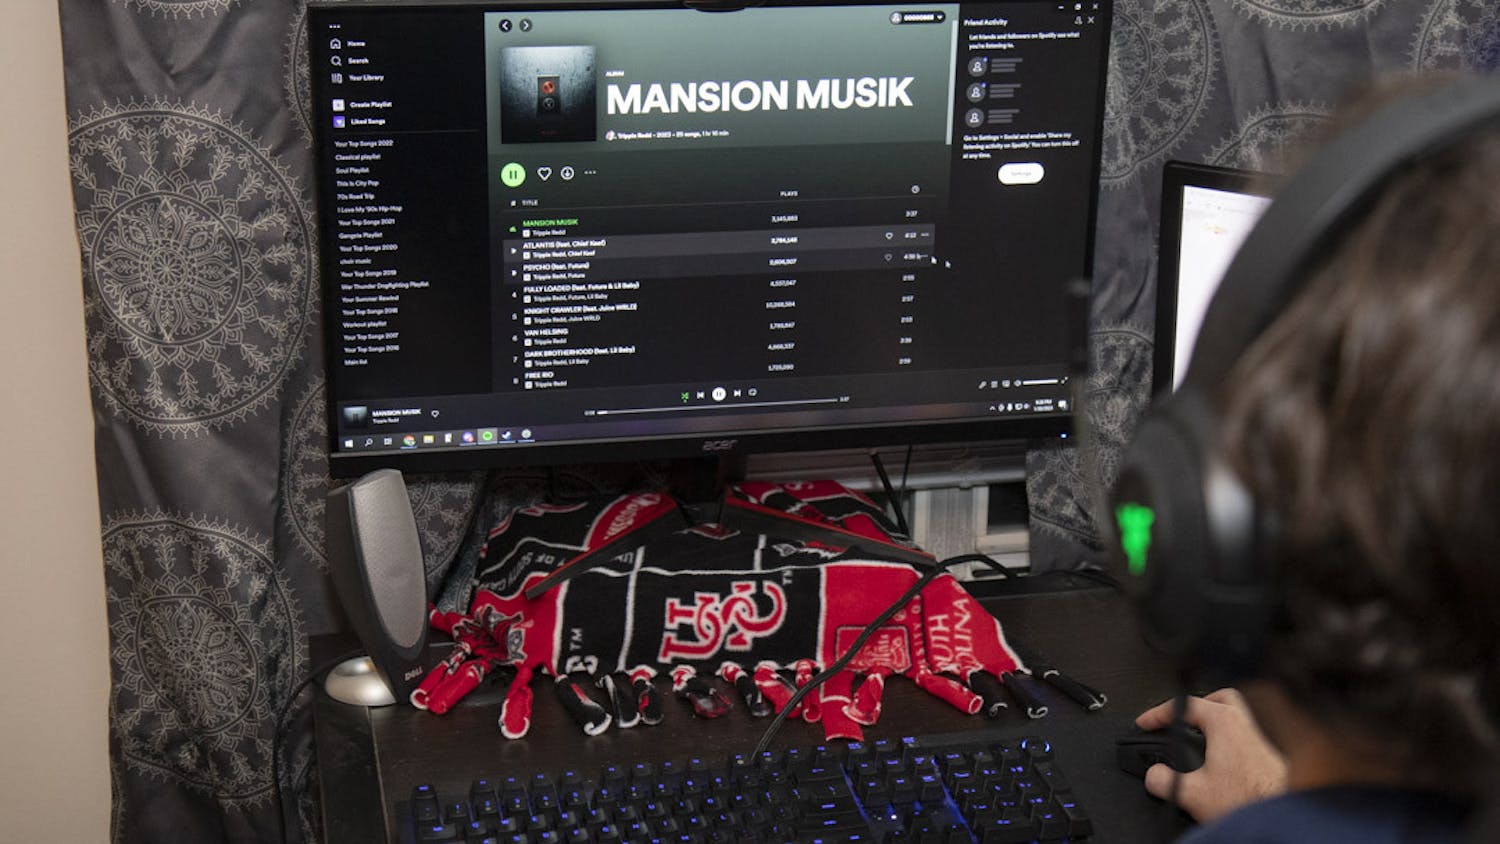 Fourth-year finance student Beck Stephenson listens to Trippie Redd's new album "Mansion Musik" on Jan 30, 2022. The new, 25-song album features lyrics from the late Juice WRLD and appearances from Lil Baby, Travis Scott, Future and other popular names in rap.